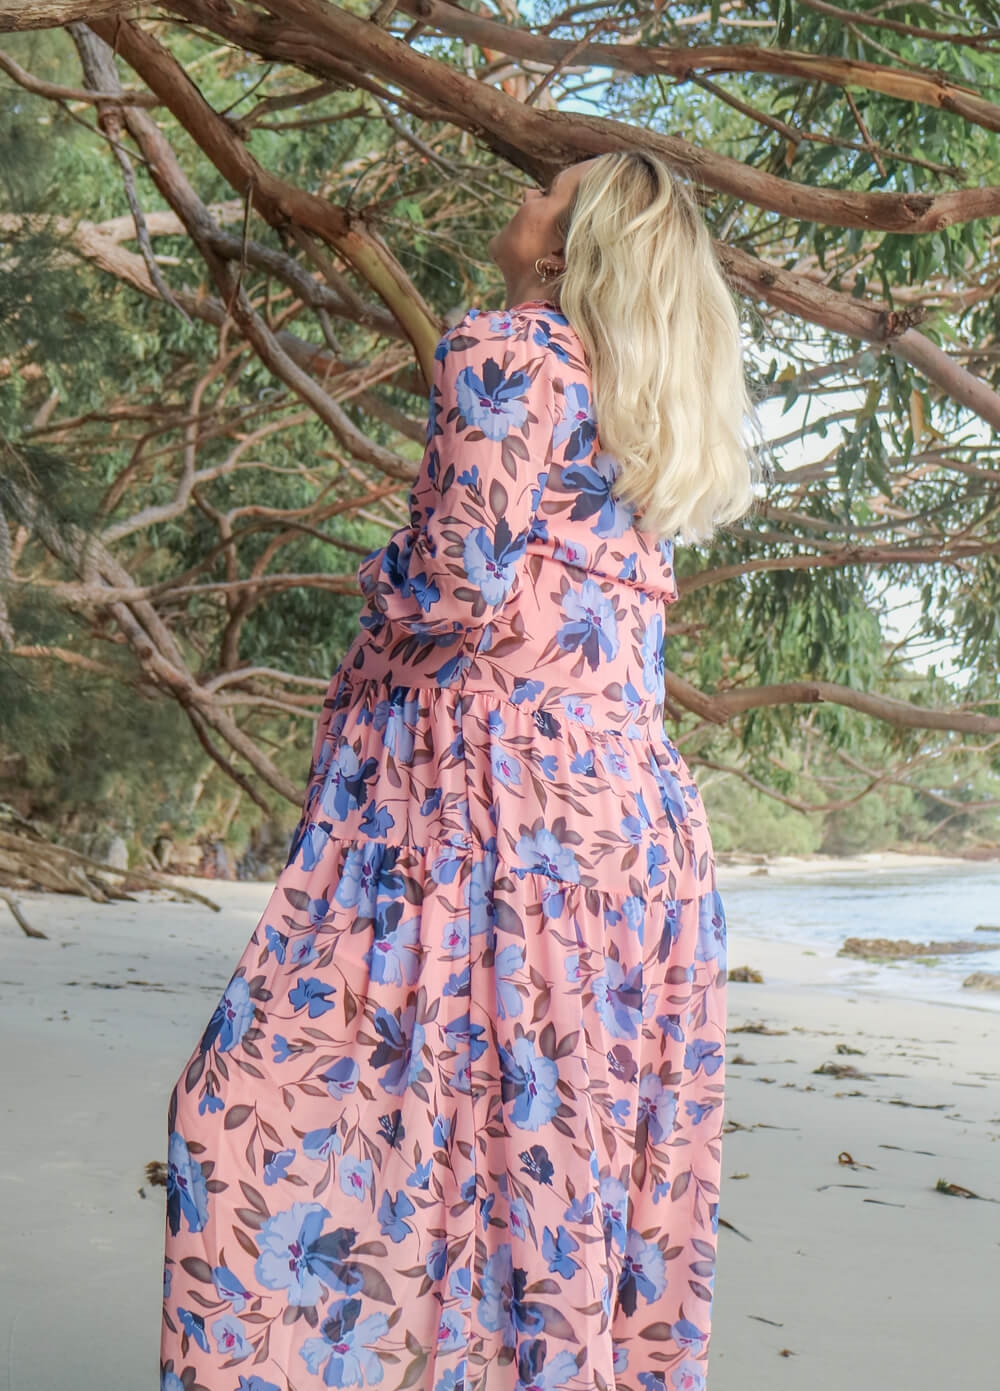 Lait & Co - Wanderlust Maternity Maxi Gown in Pink/Blue Floral